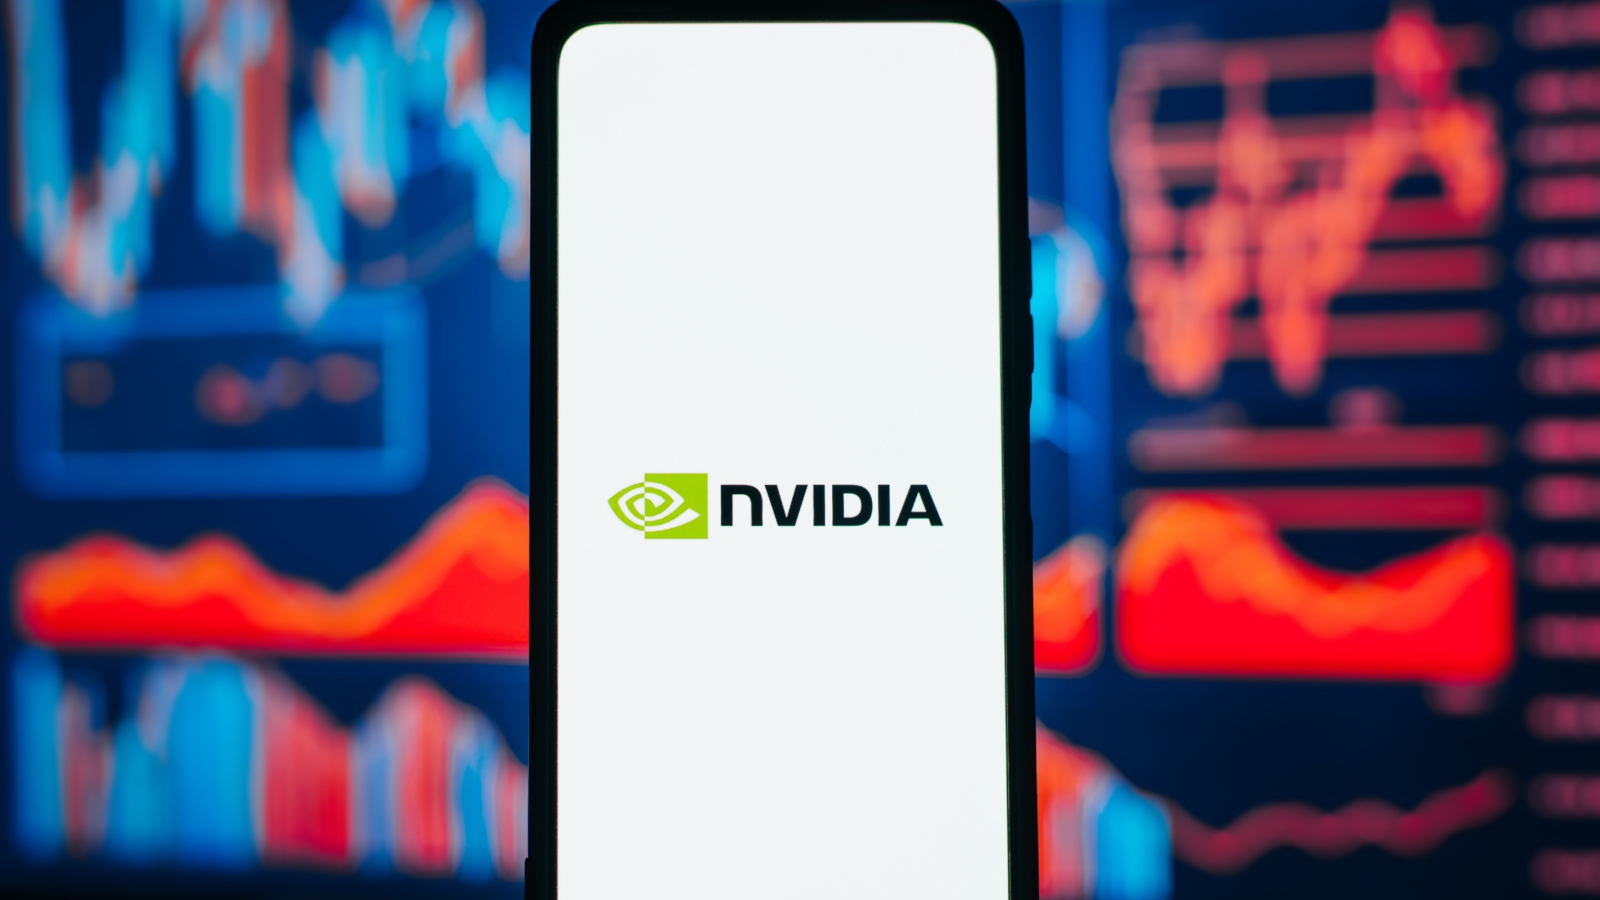 The AI Divide: Why Nvidia Might Be the Smarter Bet Over AMD Stock